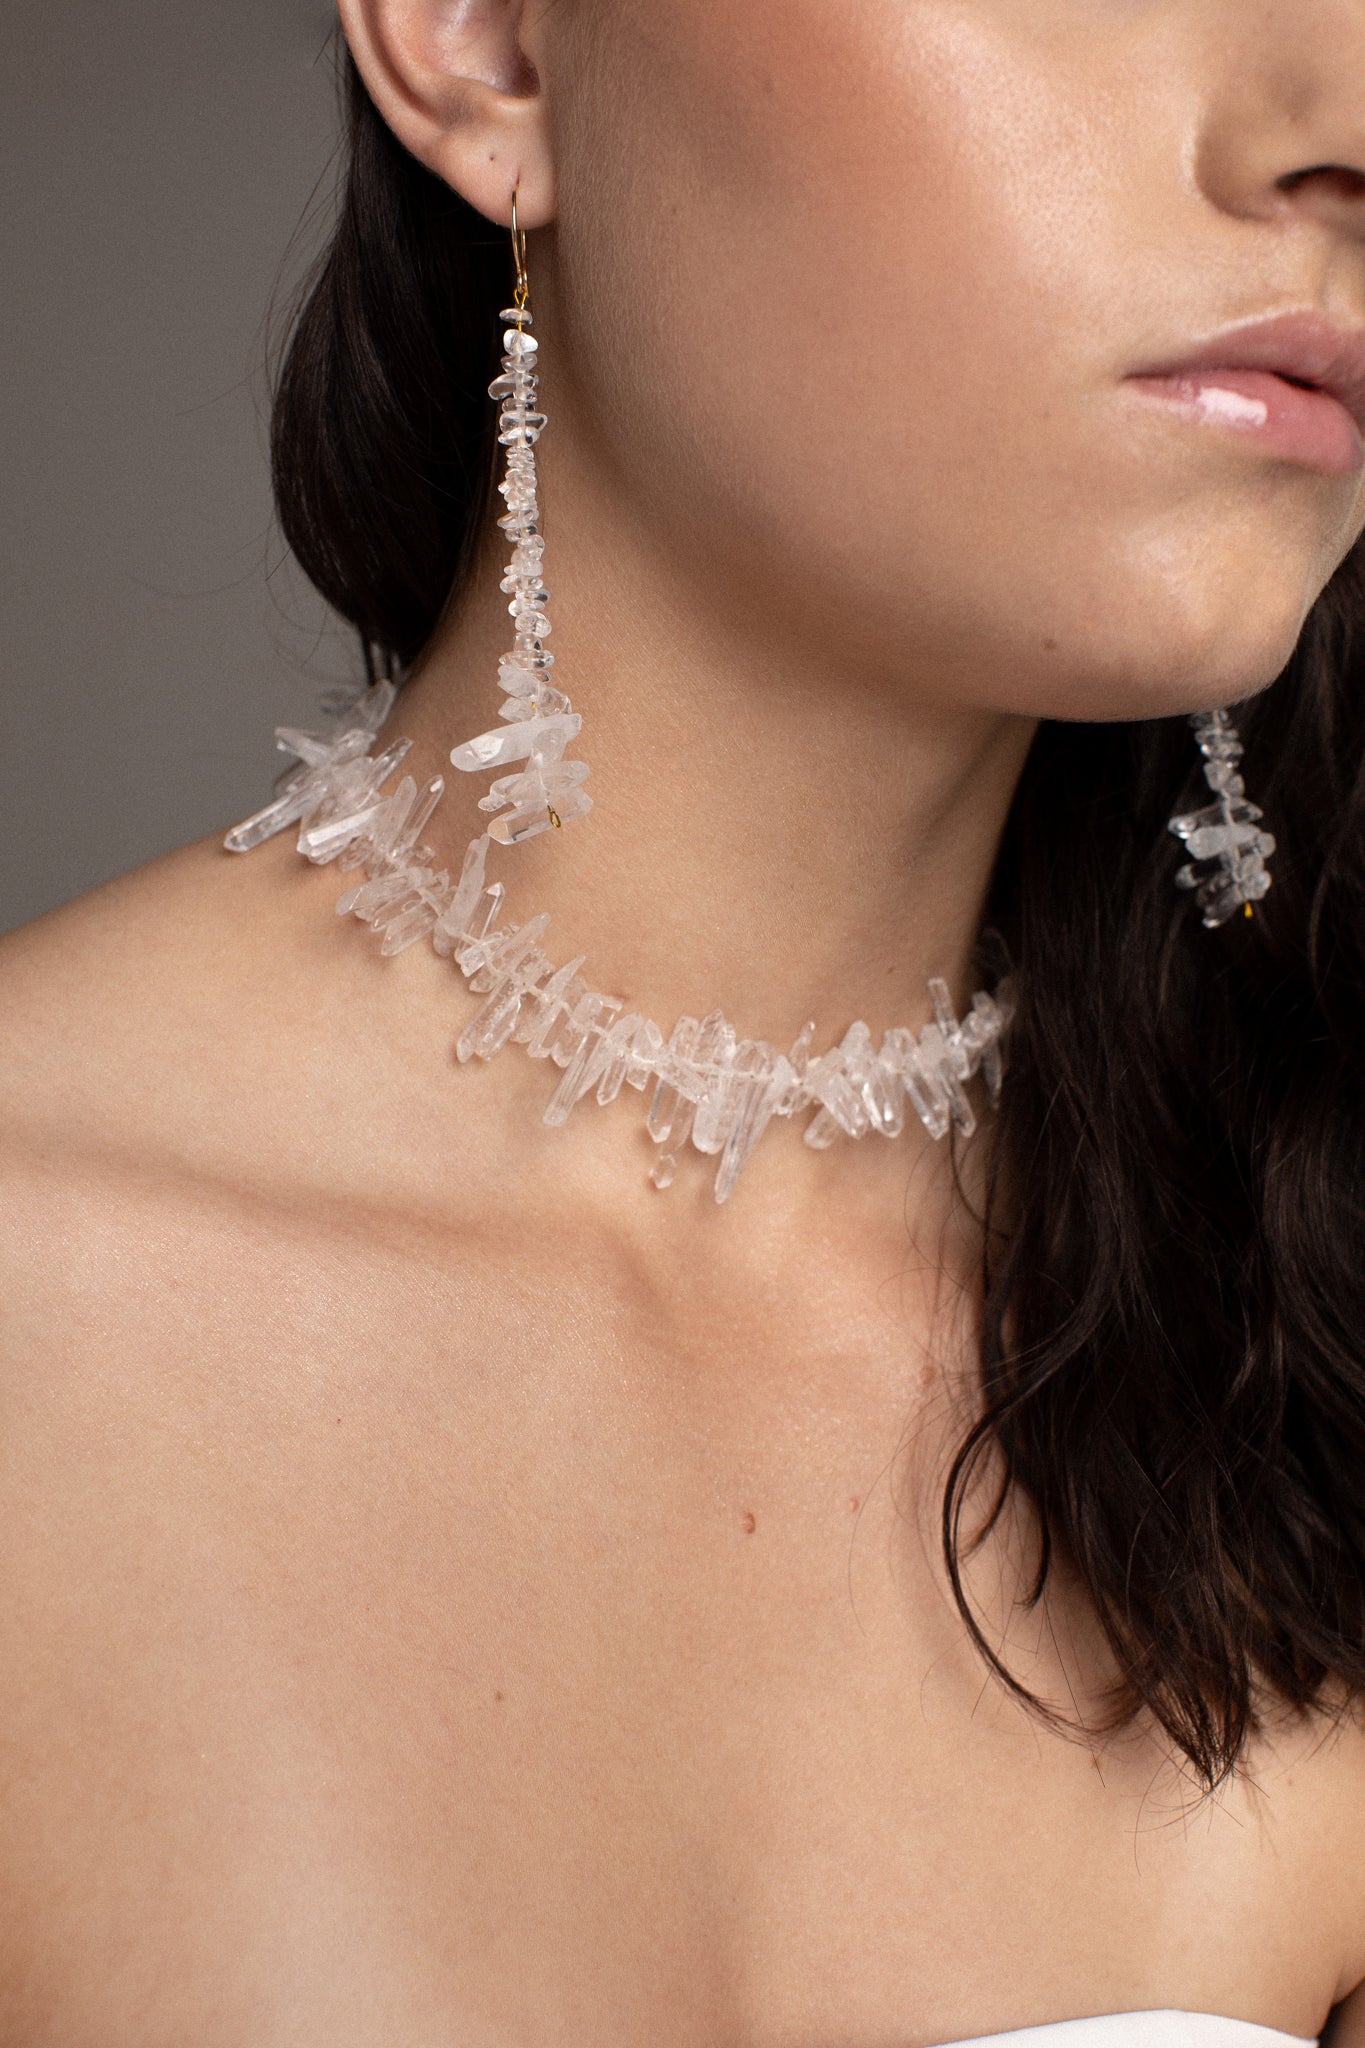 Adorned with quartz raw crystals, this choker captures a unique and raw charm.